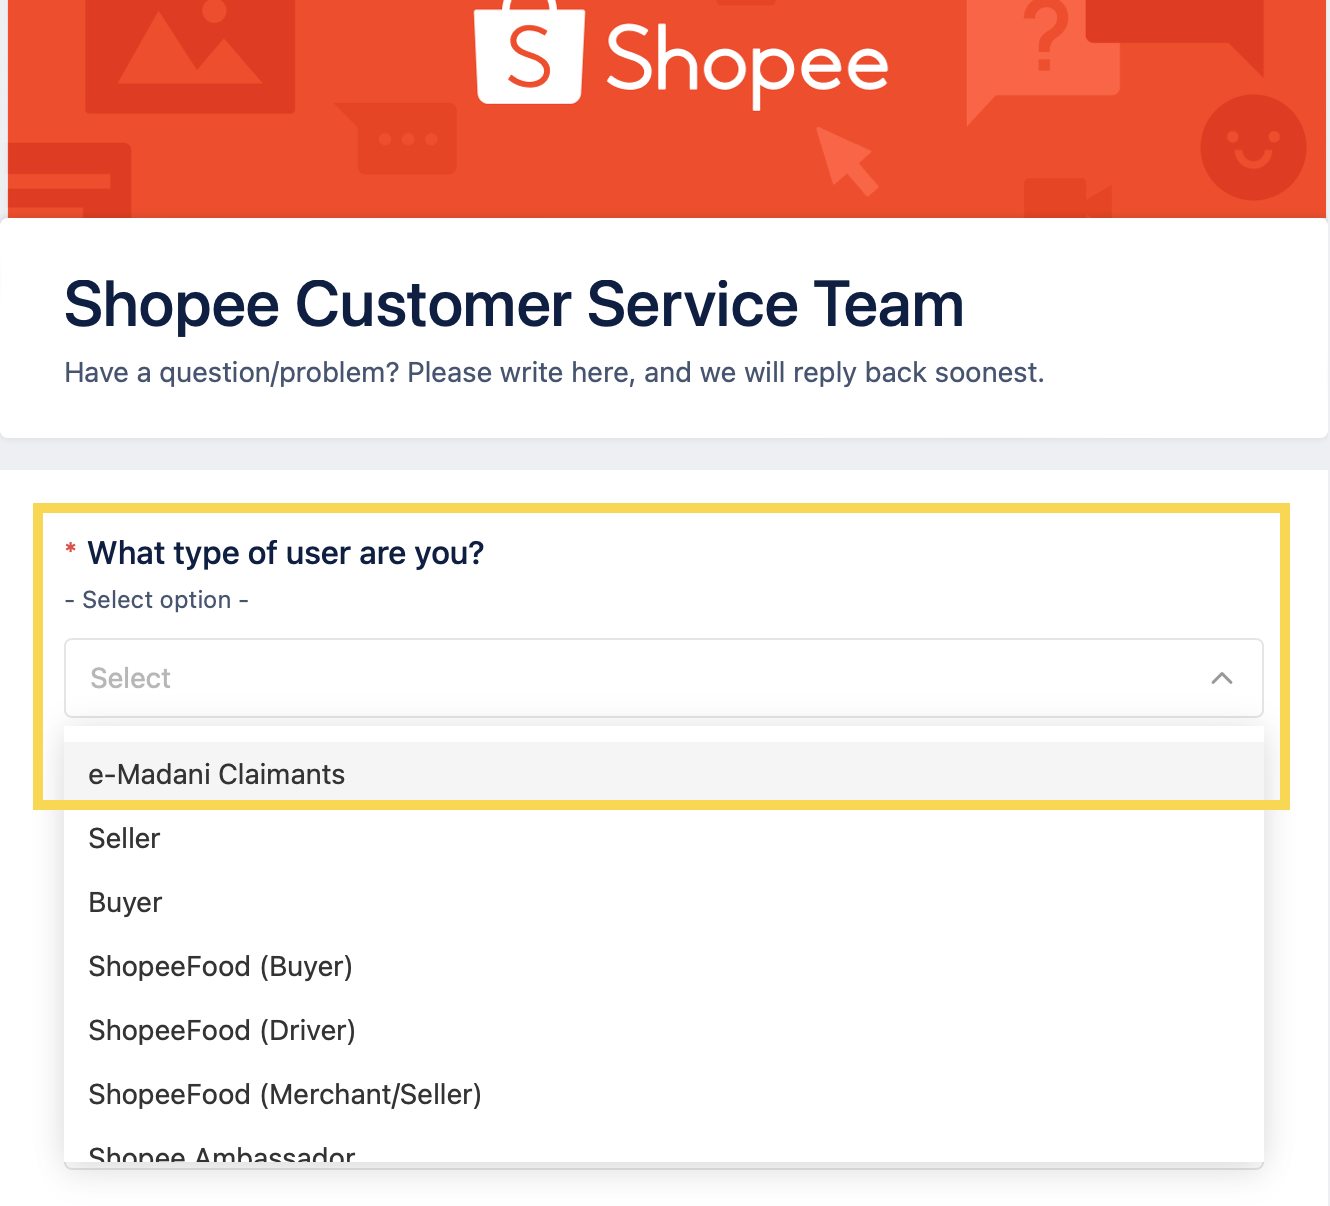 Shopee customer service_ appeal for emadani